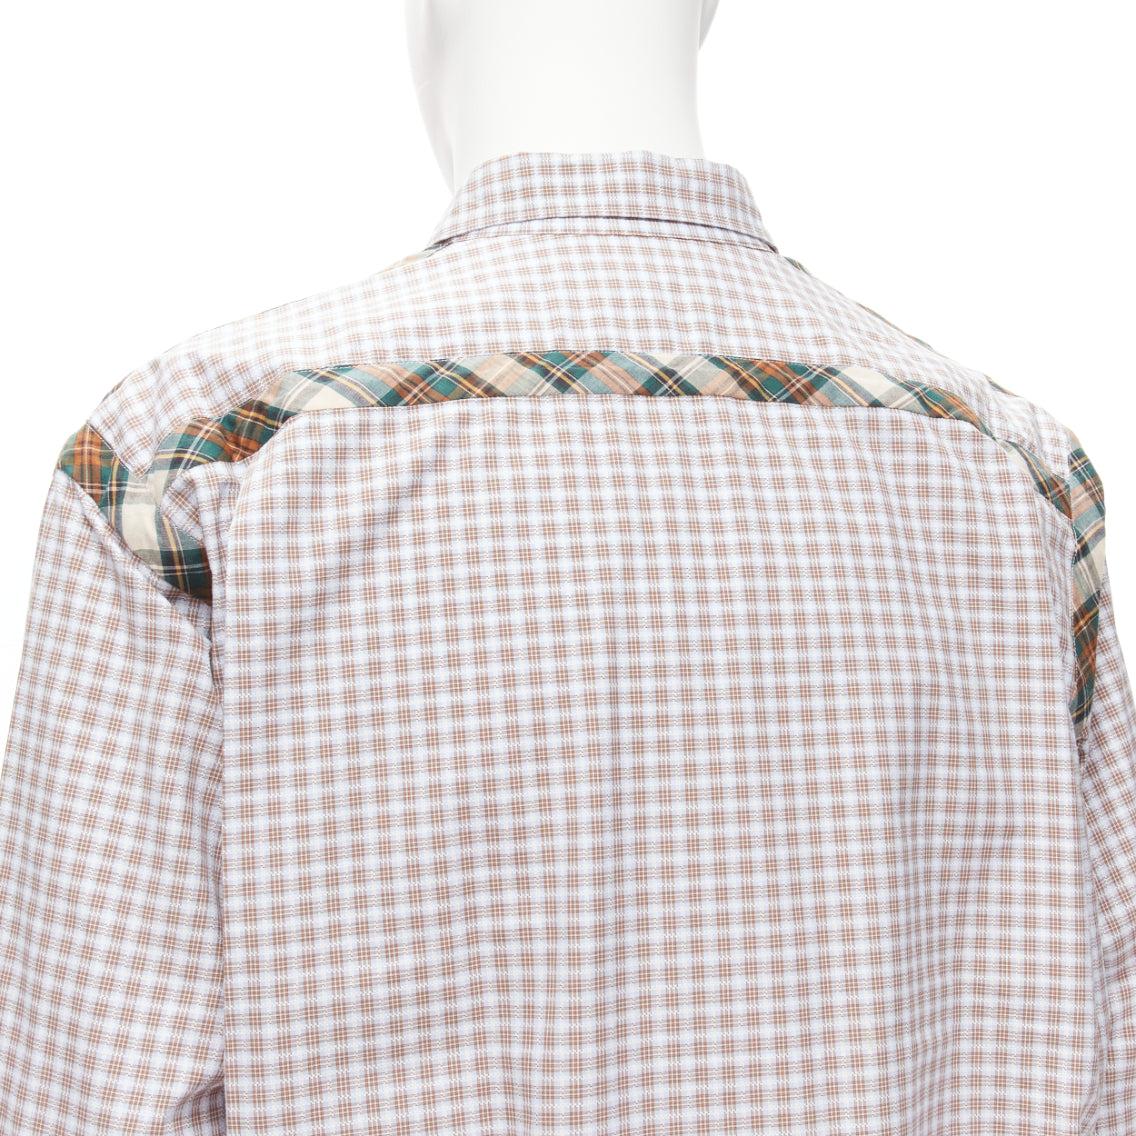 COMME DES GARCONS SHIRT brown blue white mixed plaid cotton shirt L
Reference: CAWG/A00265
Brand: Comme Des Garcons
Collection: SHIRTS
Material: Cotton
Color: Brown, Multicolour
Pattern: Plaid
Closure: Button
Extra Details: Shell button closure.